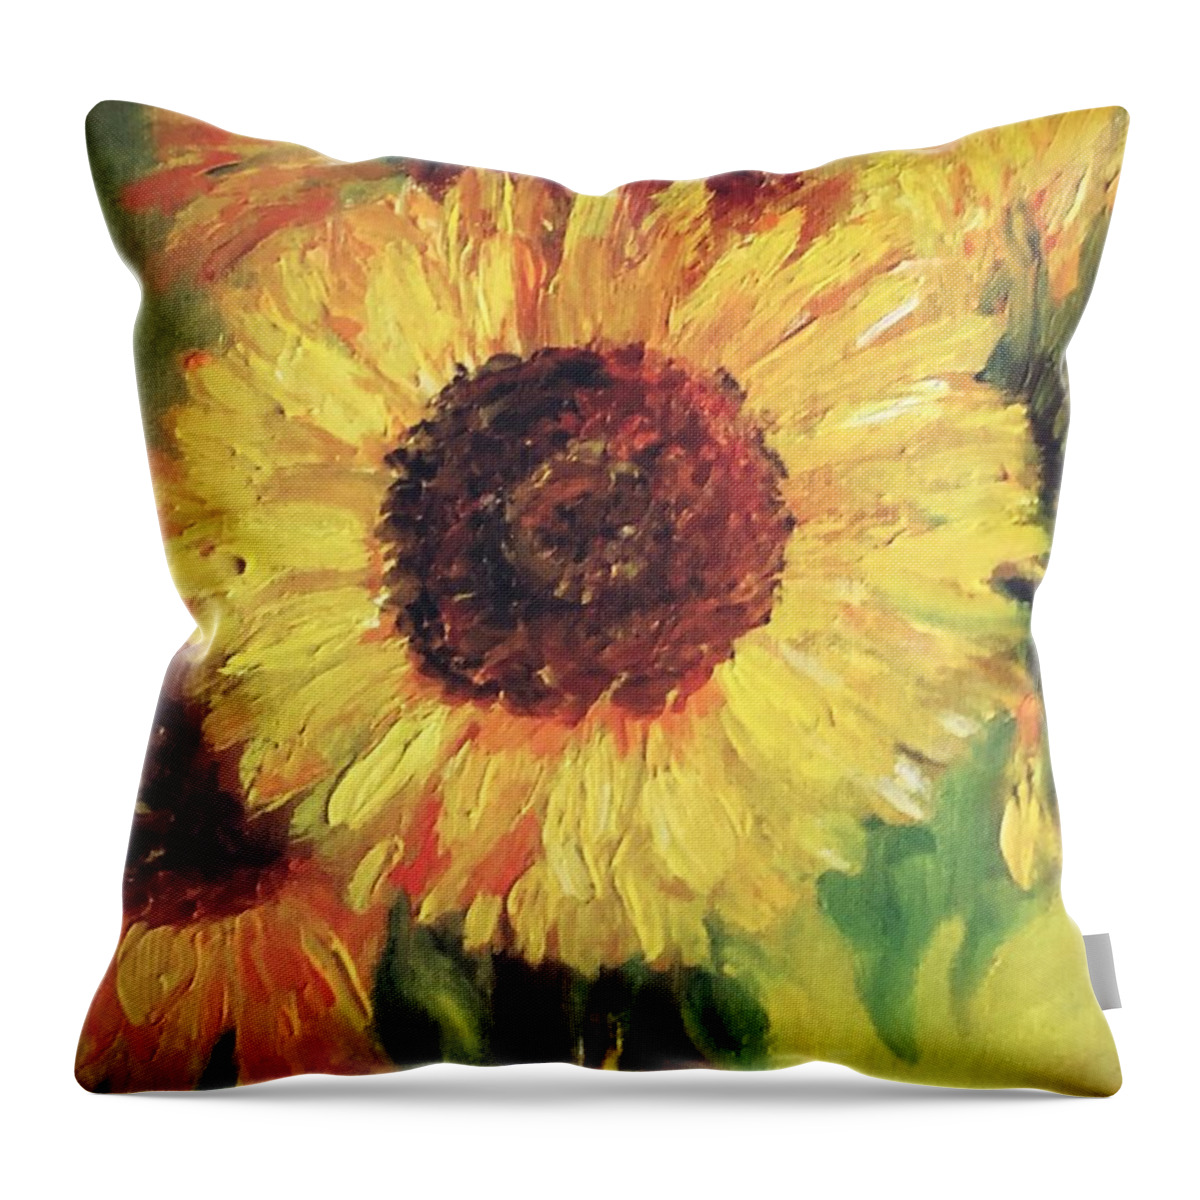 Sunflower Throw Pillow featuring the painting Sunflower by Barbara Landry